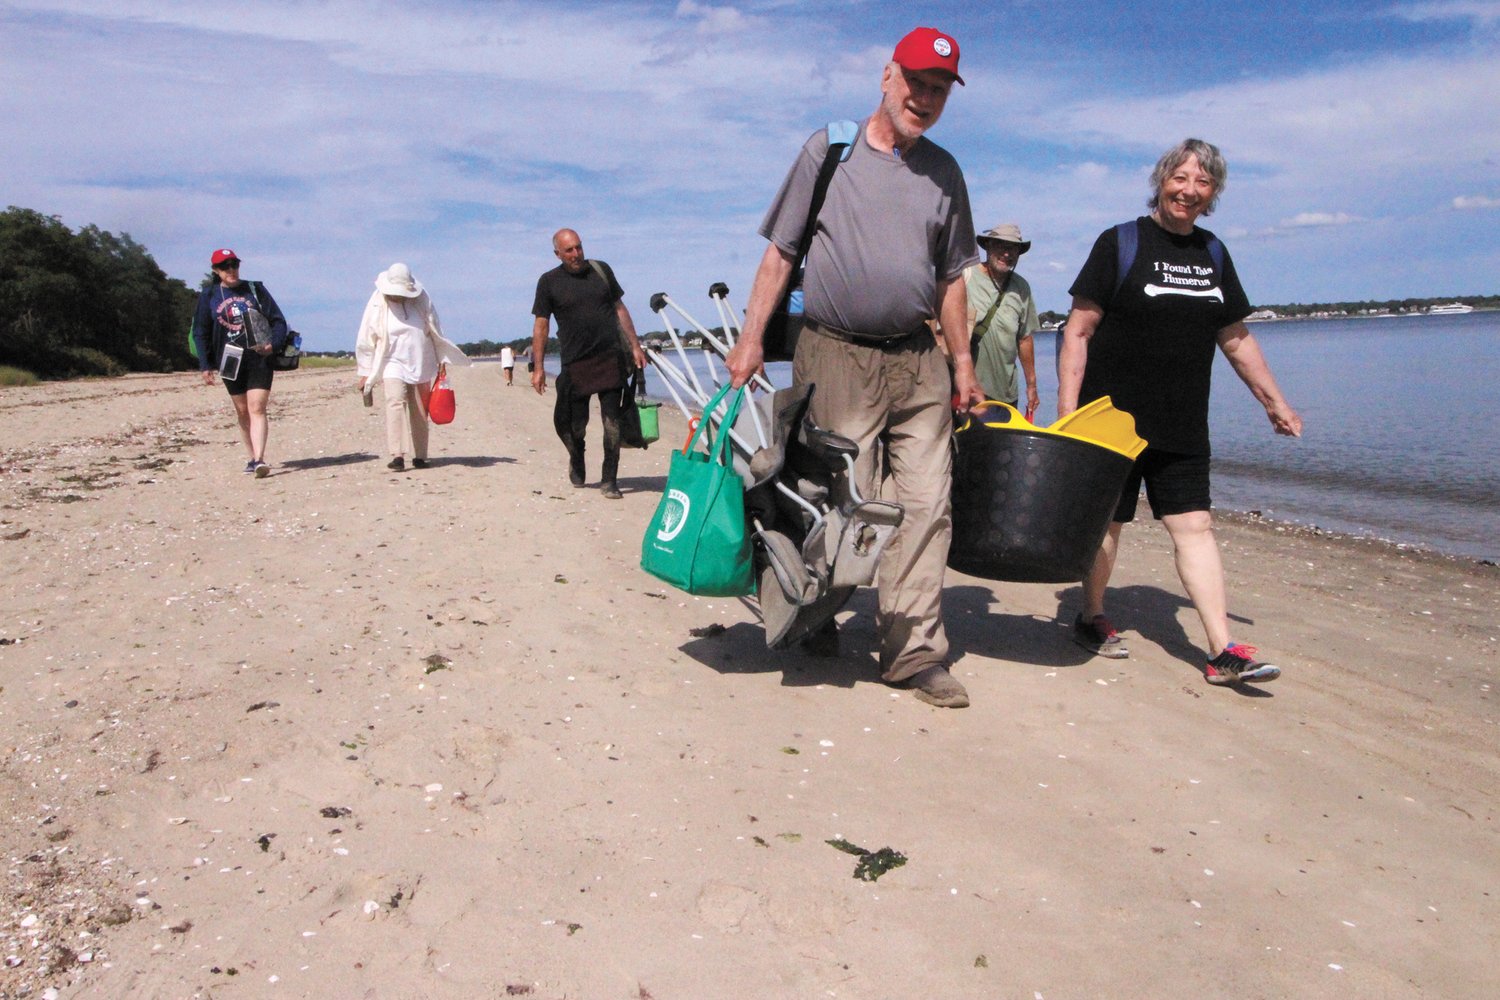 PACKING UP: Volunteers in the search for the Gaspee head for their cars after a day of collecting measurements and doing a survey of Gaspee Point and the immediate shallows. (Warwick Beacon photo)